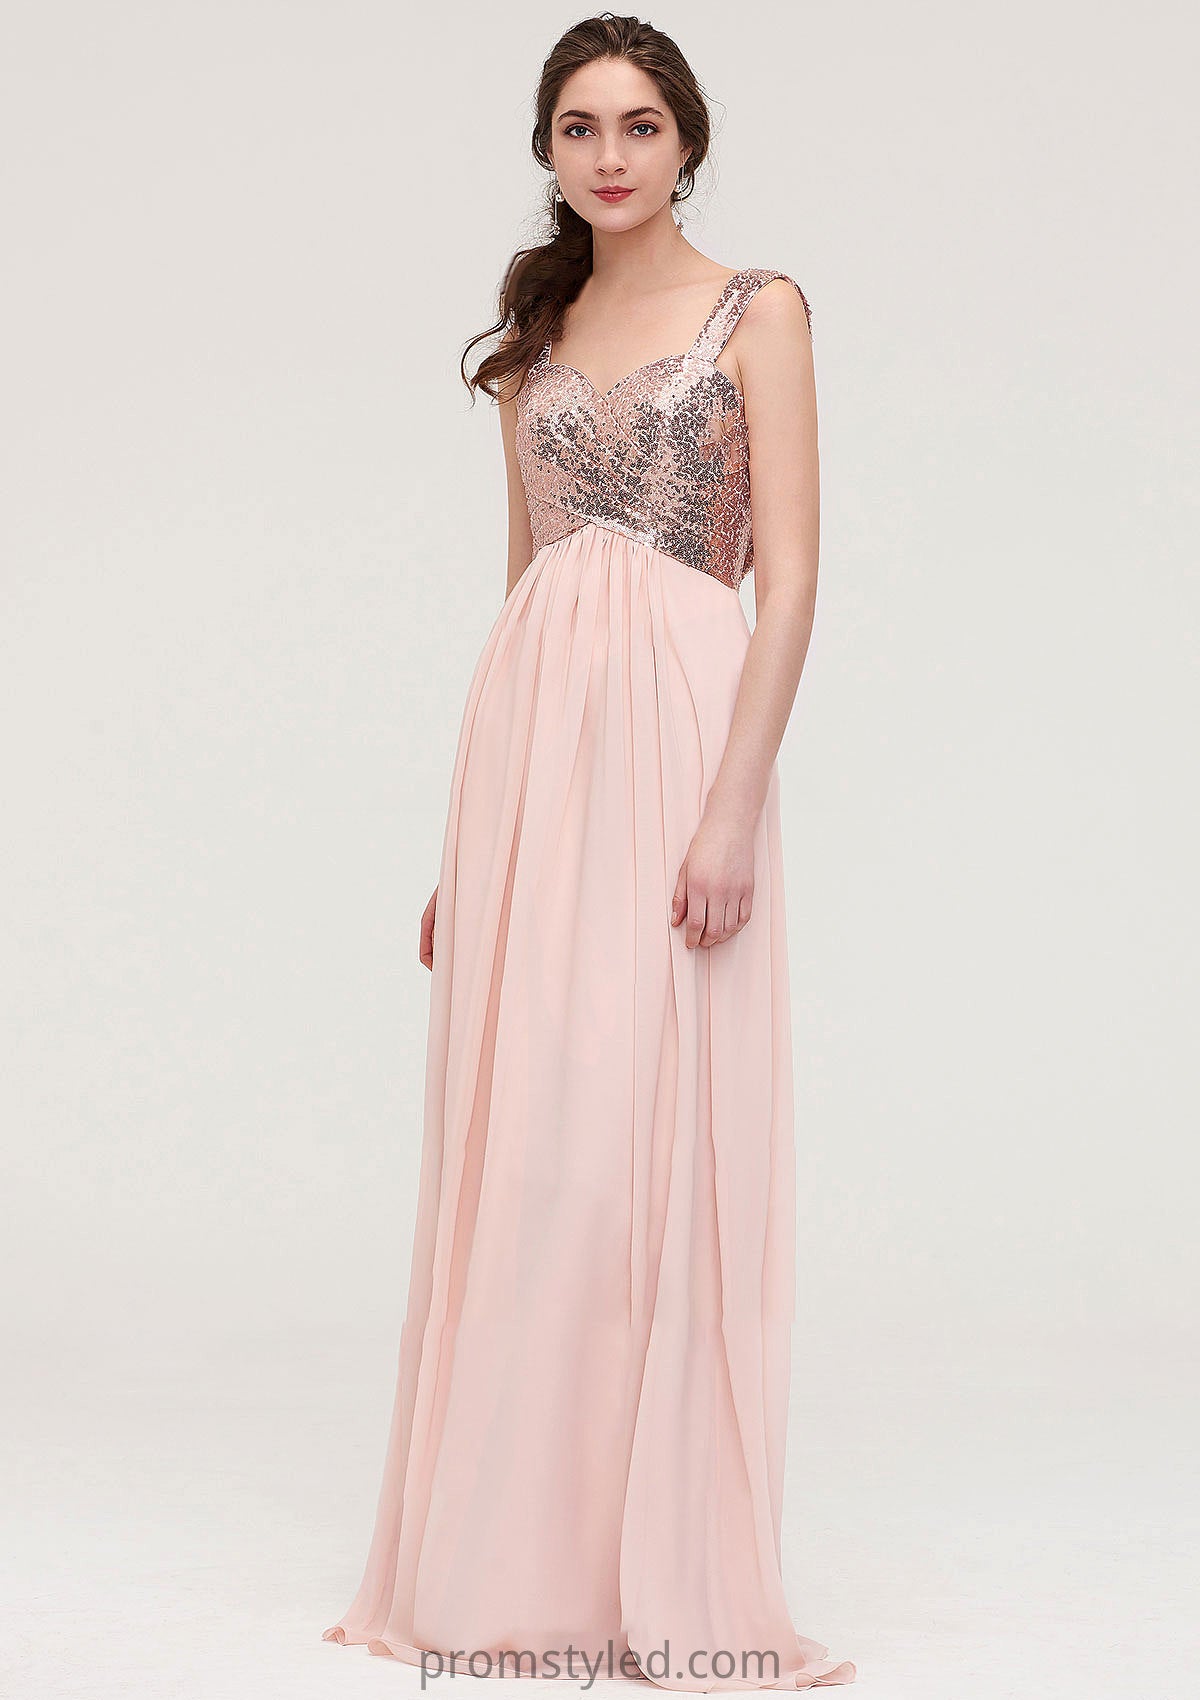 Sleeveless Long/Floor-Length Sweetheart A-line/Princess Chiffon Bridesmaid Dresses With Pleated Sequins Kay HLP0025494